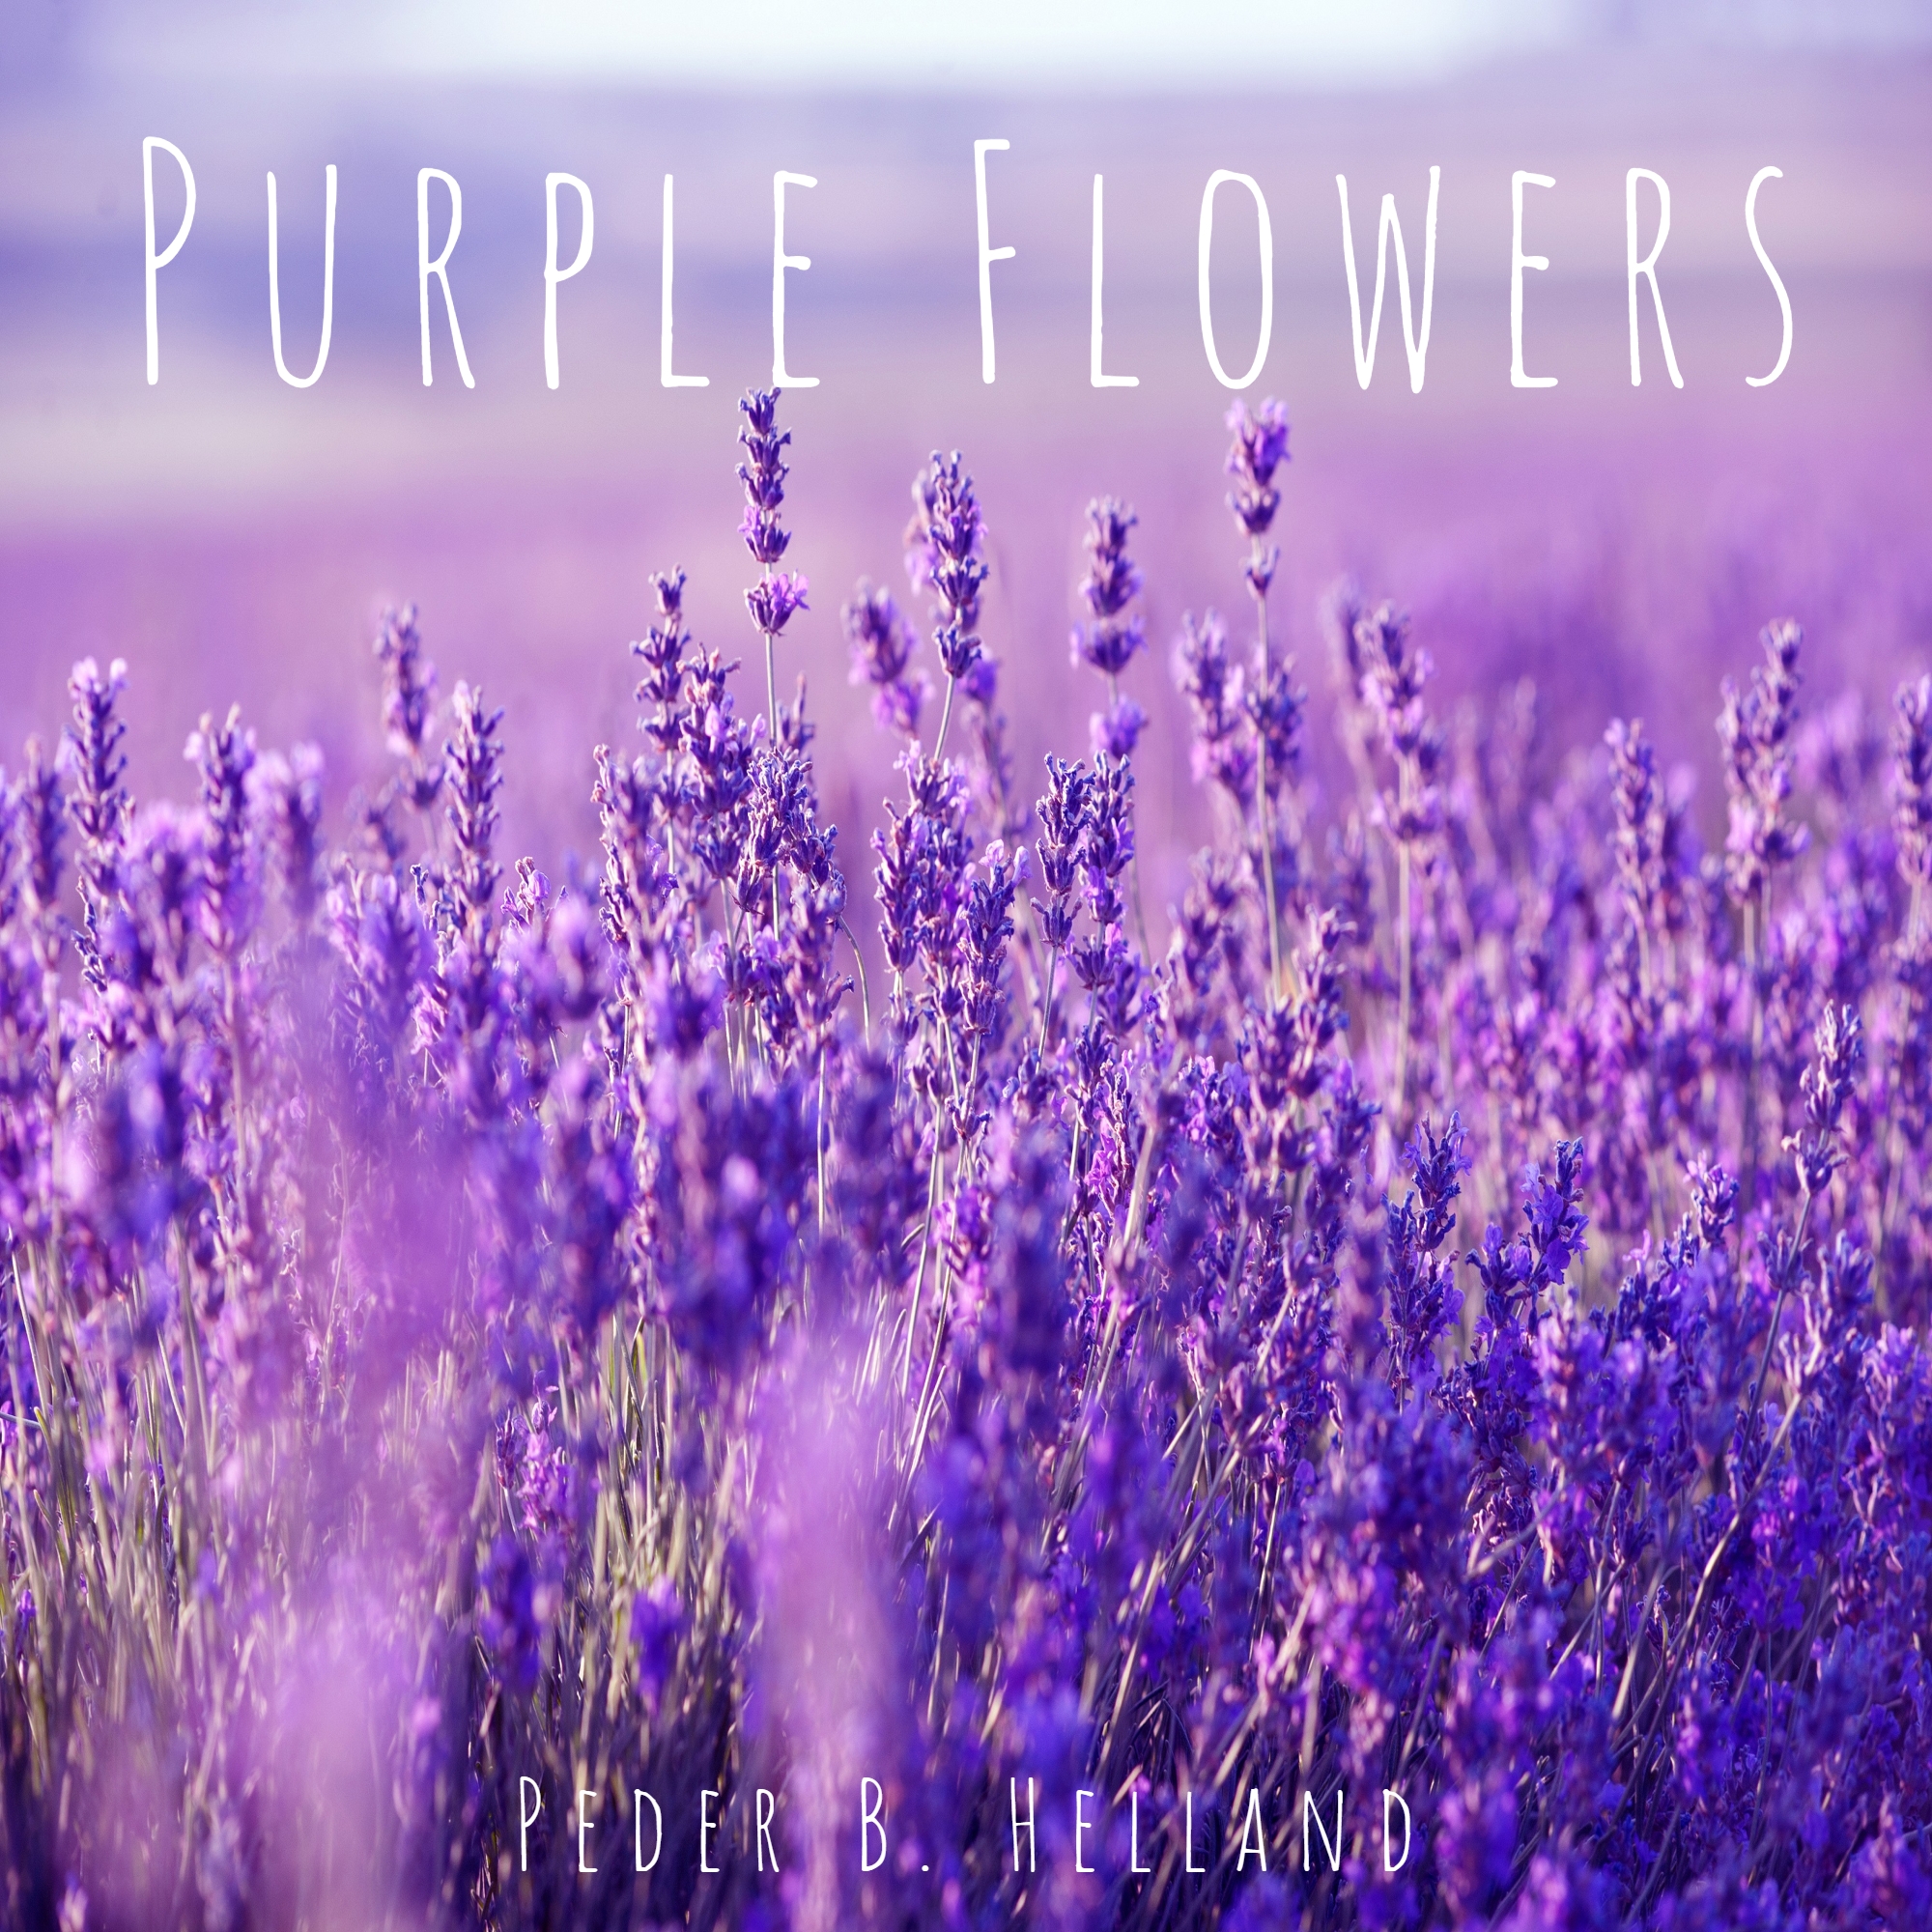 Cover art for the single Purple Flowers by Peder B. Helland